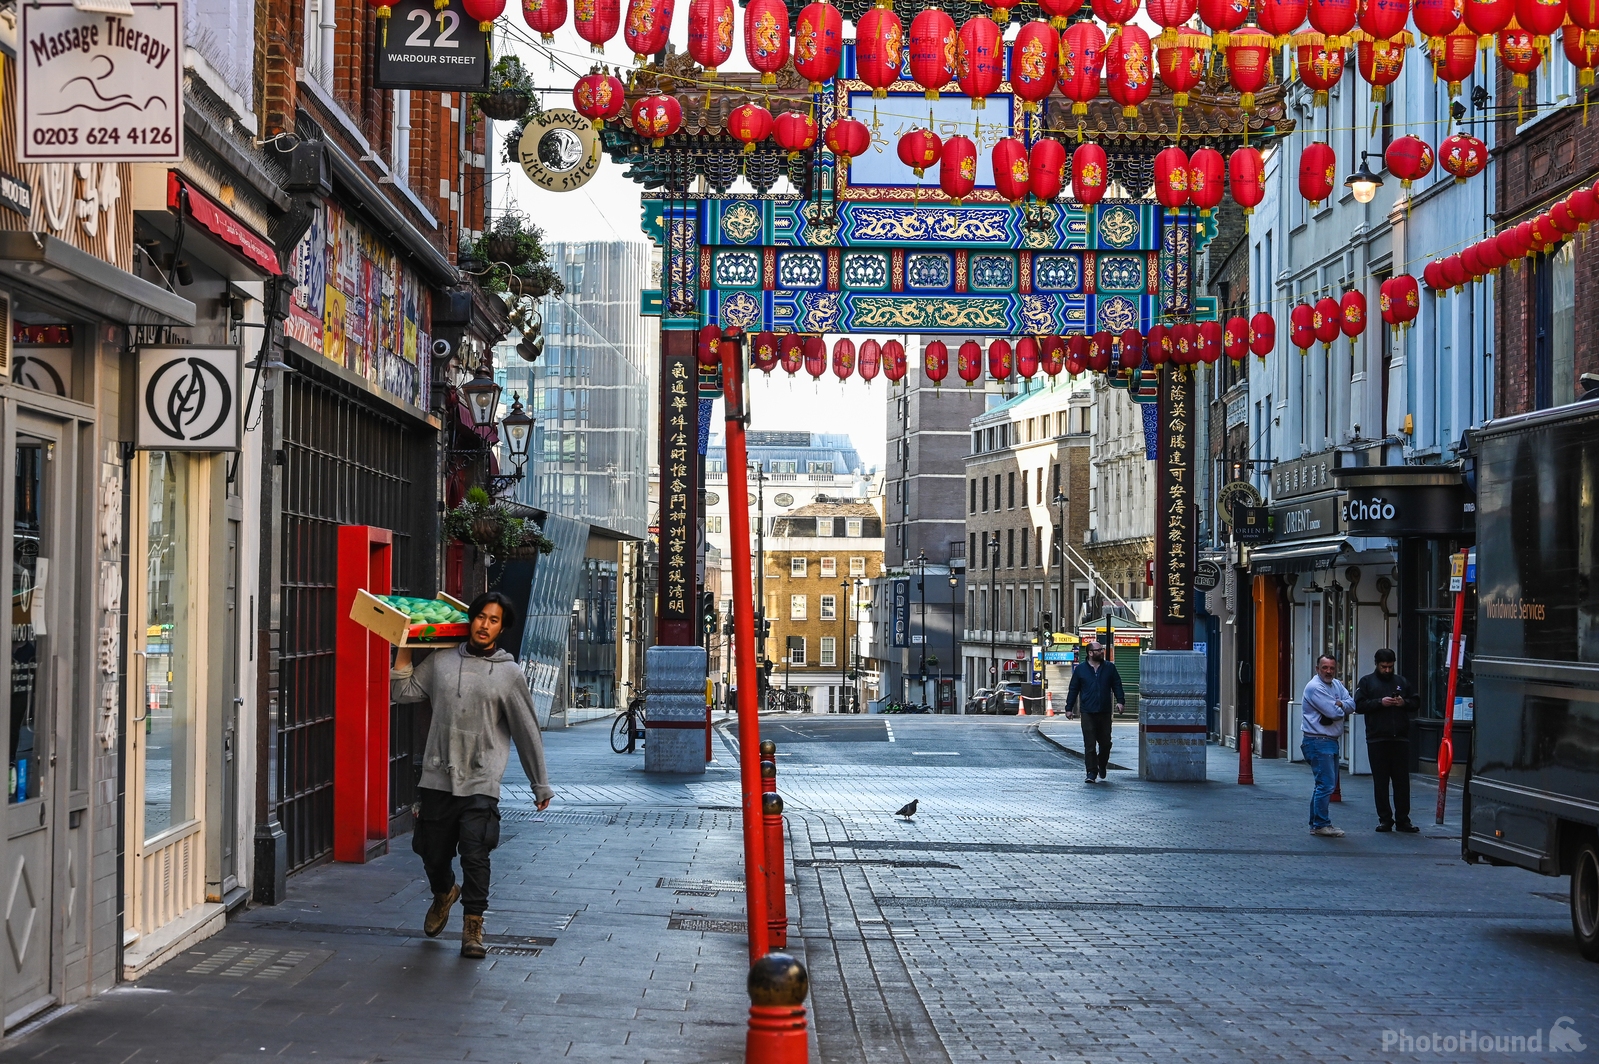 Image of Chinatown by Jules Renahan